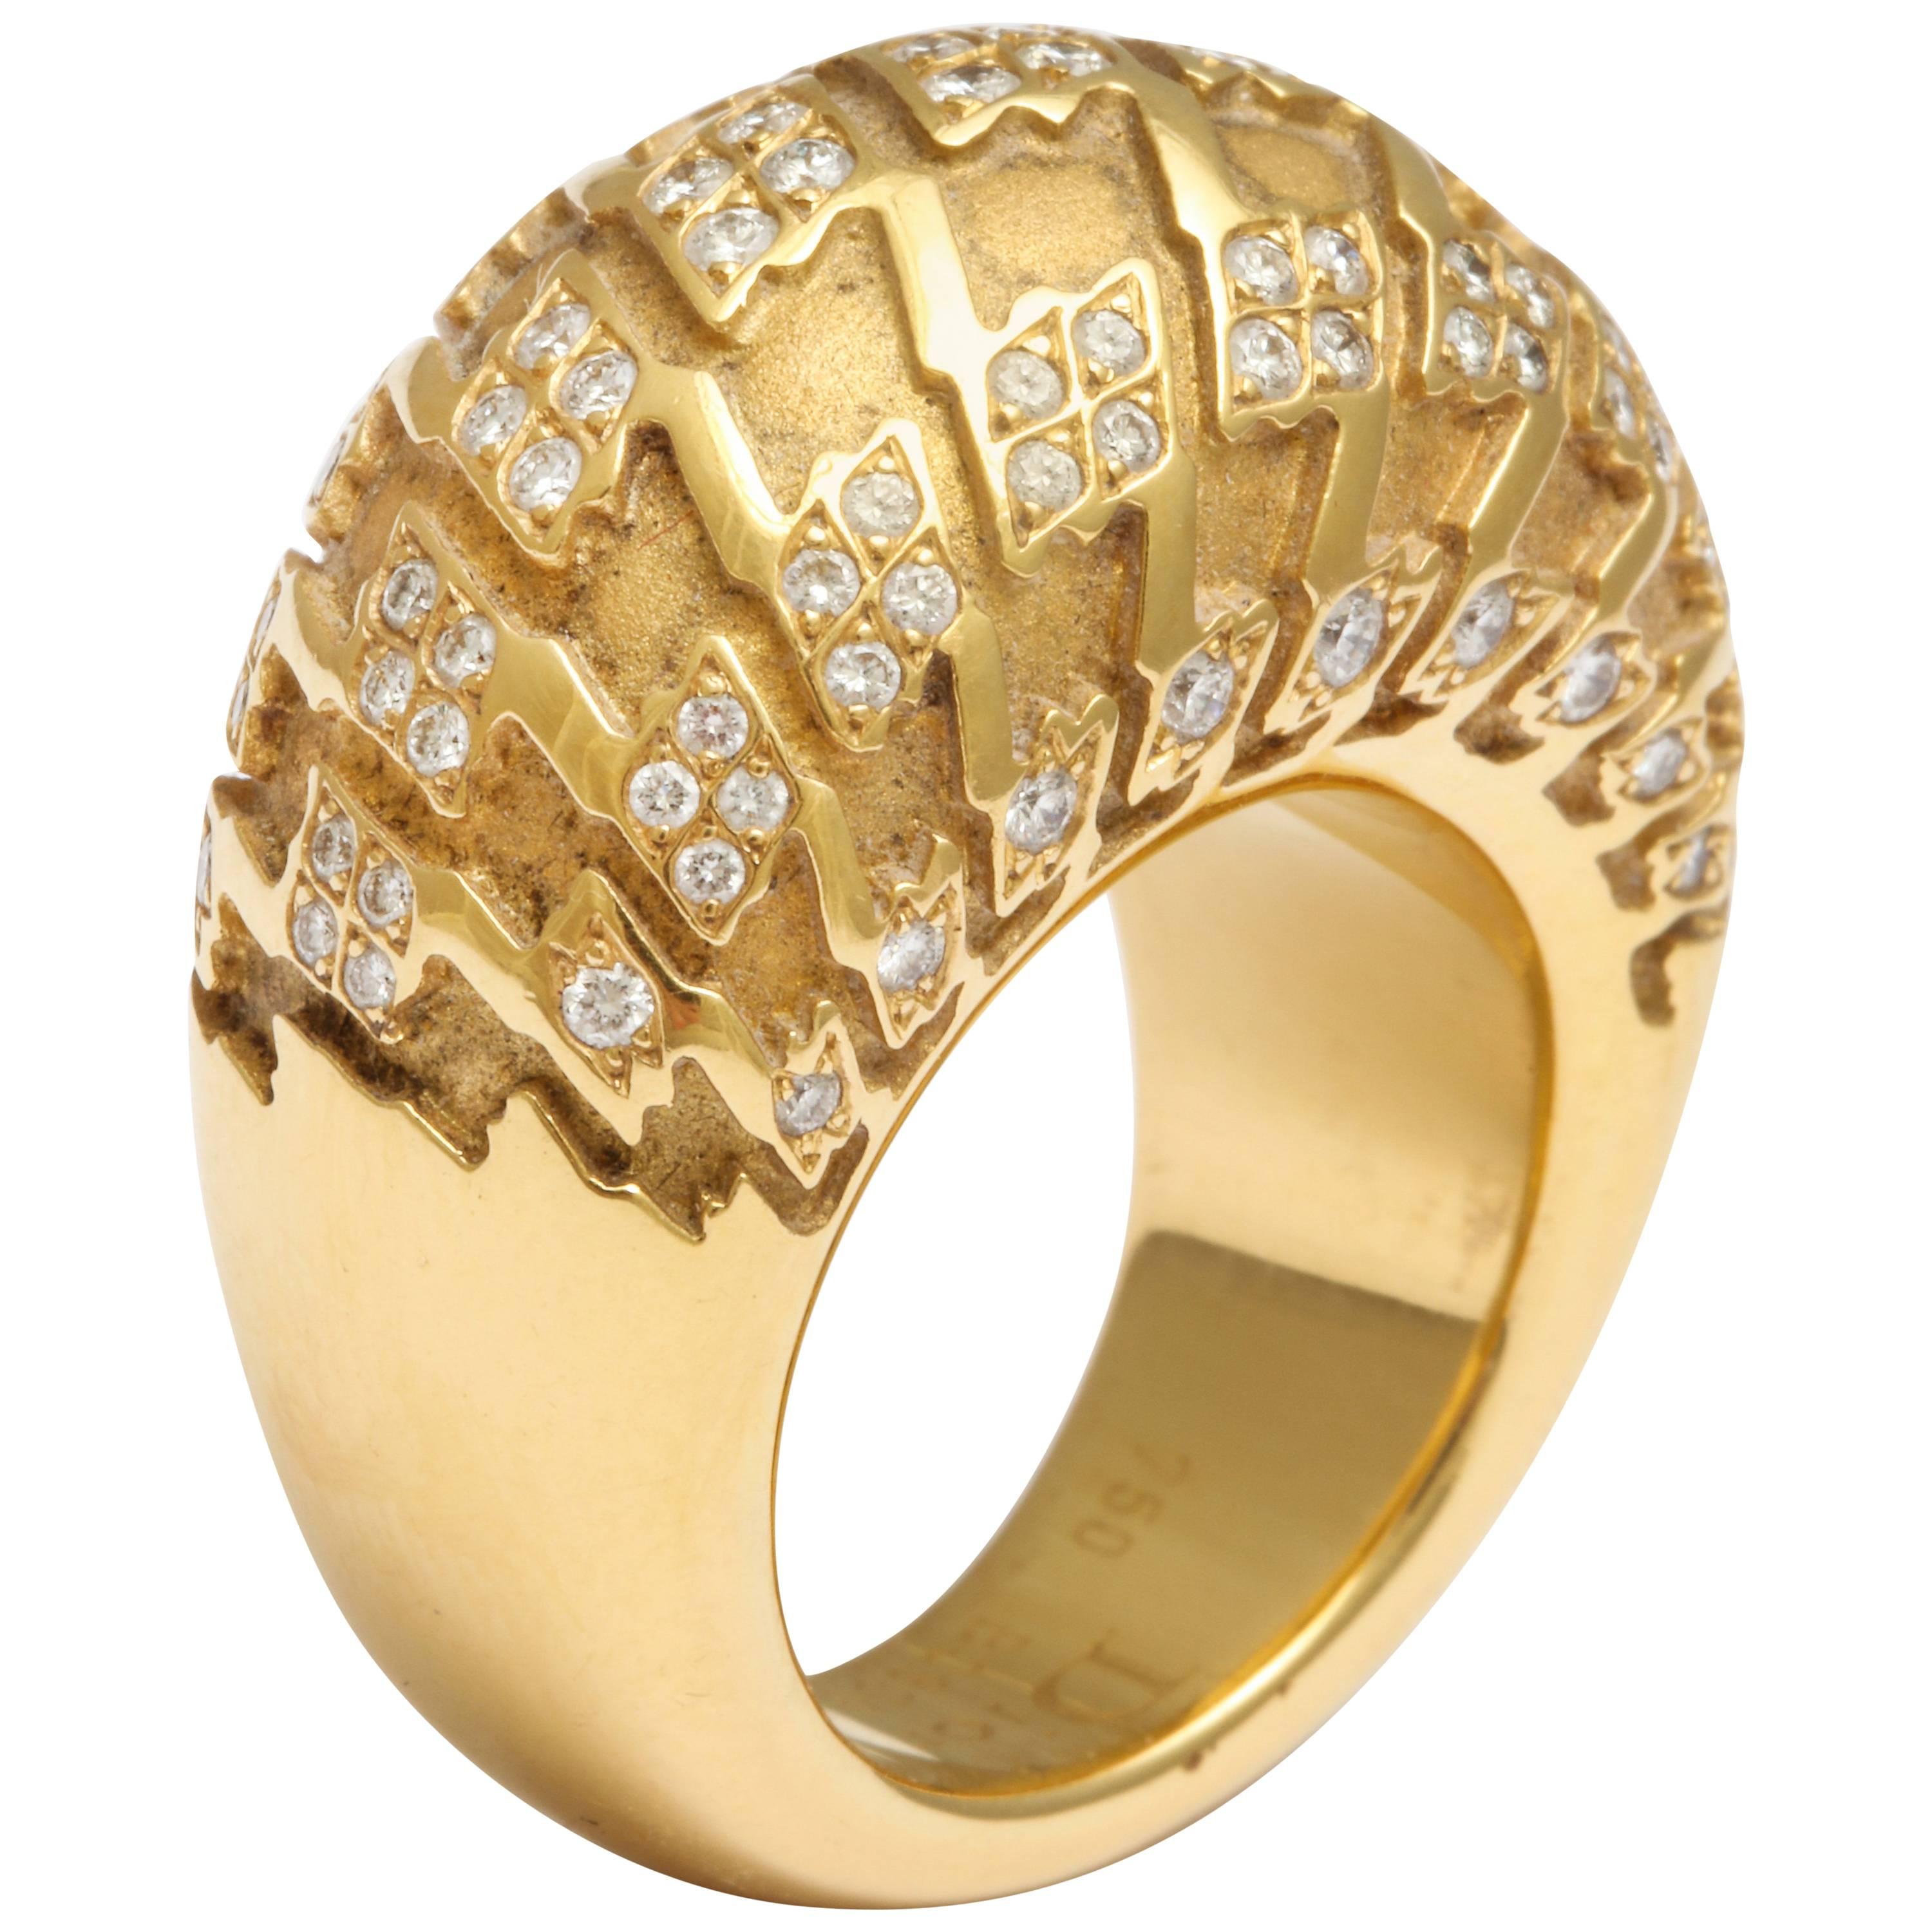 Christian Dior Diamond Gold Houndstooth Dome Ring